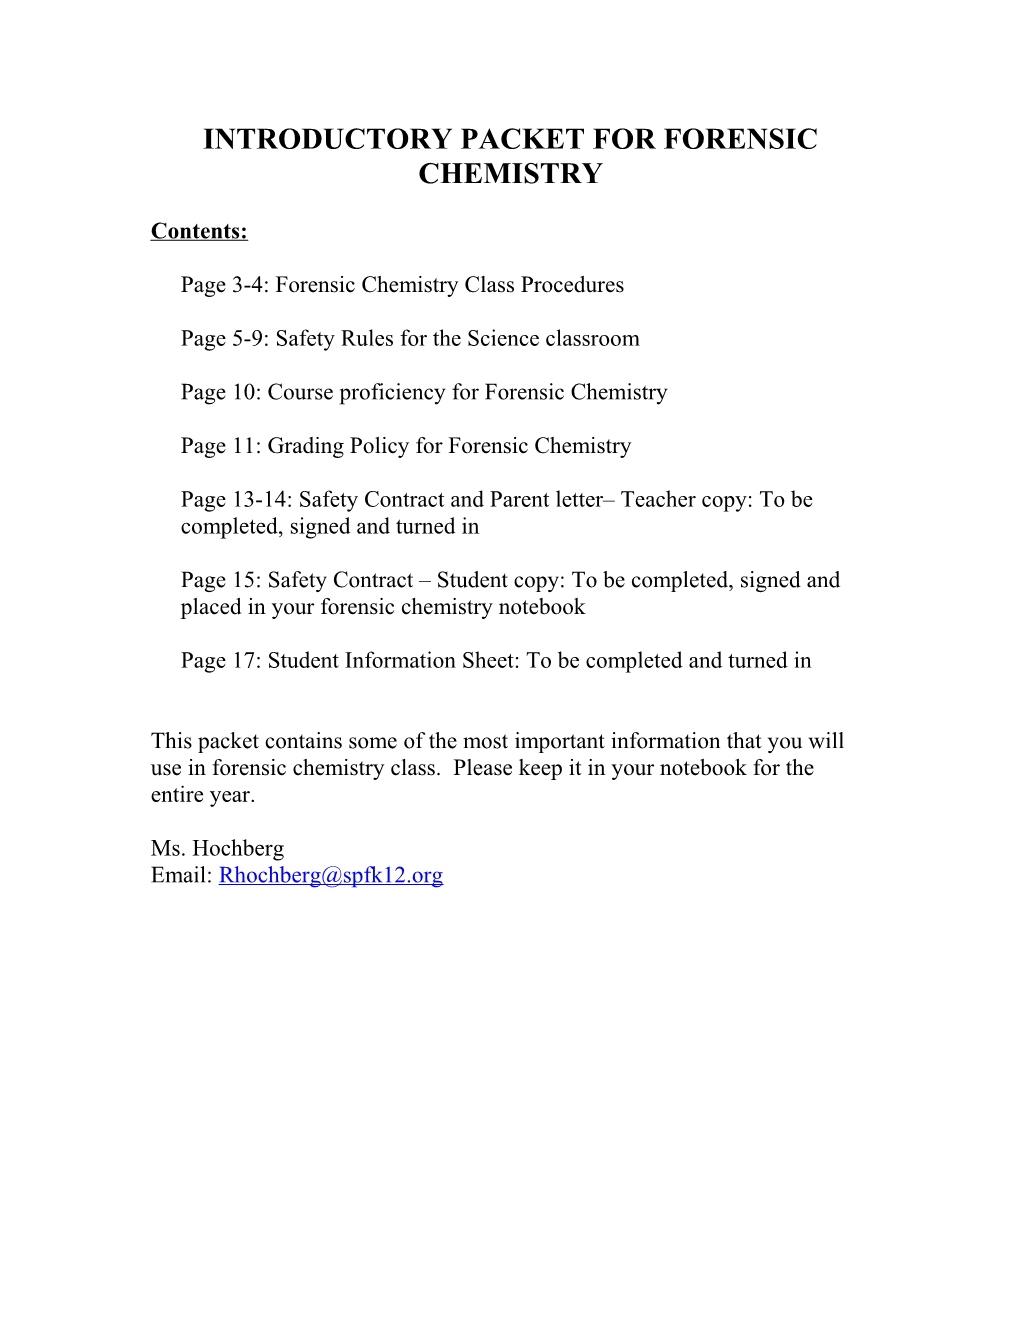 Introductory Packet for Forensic Chemistry